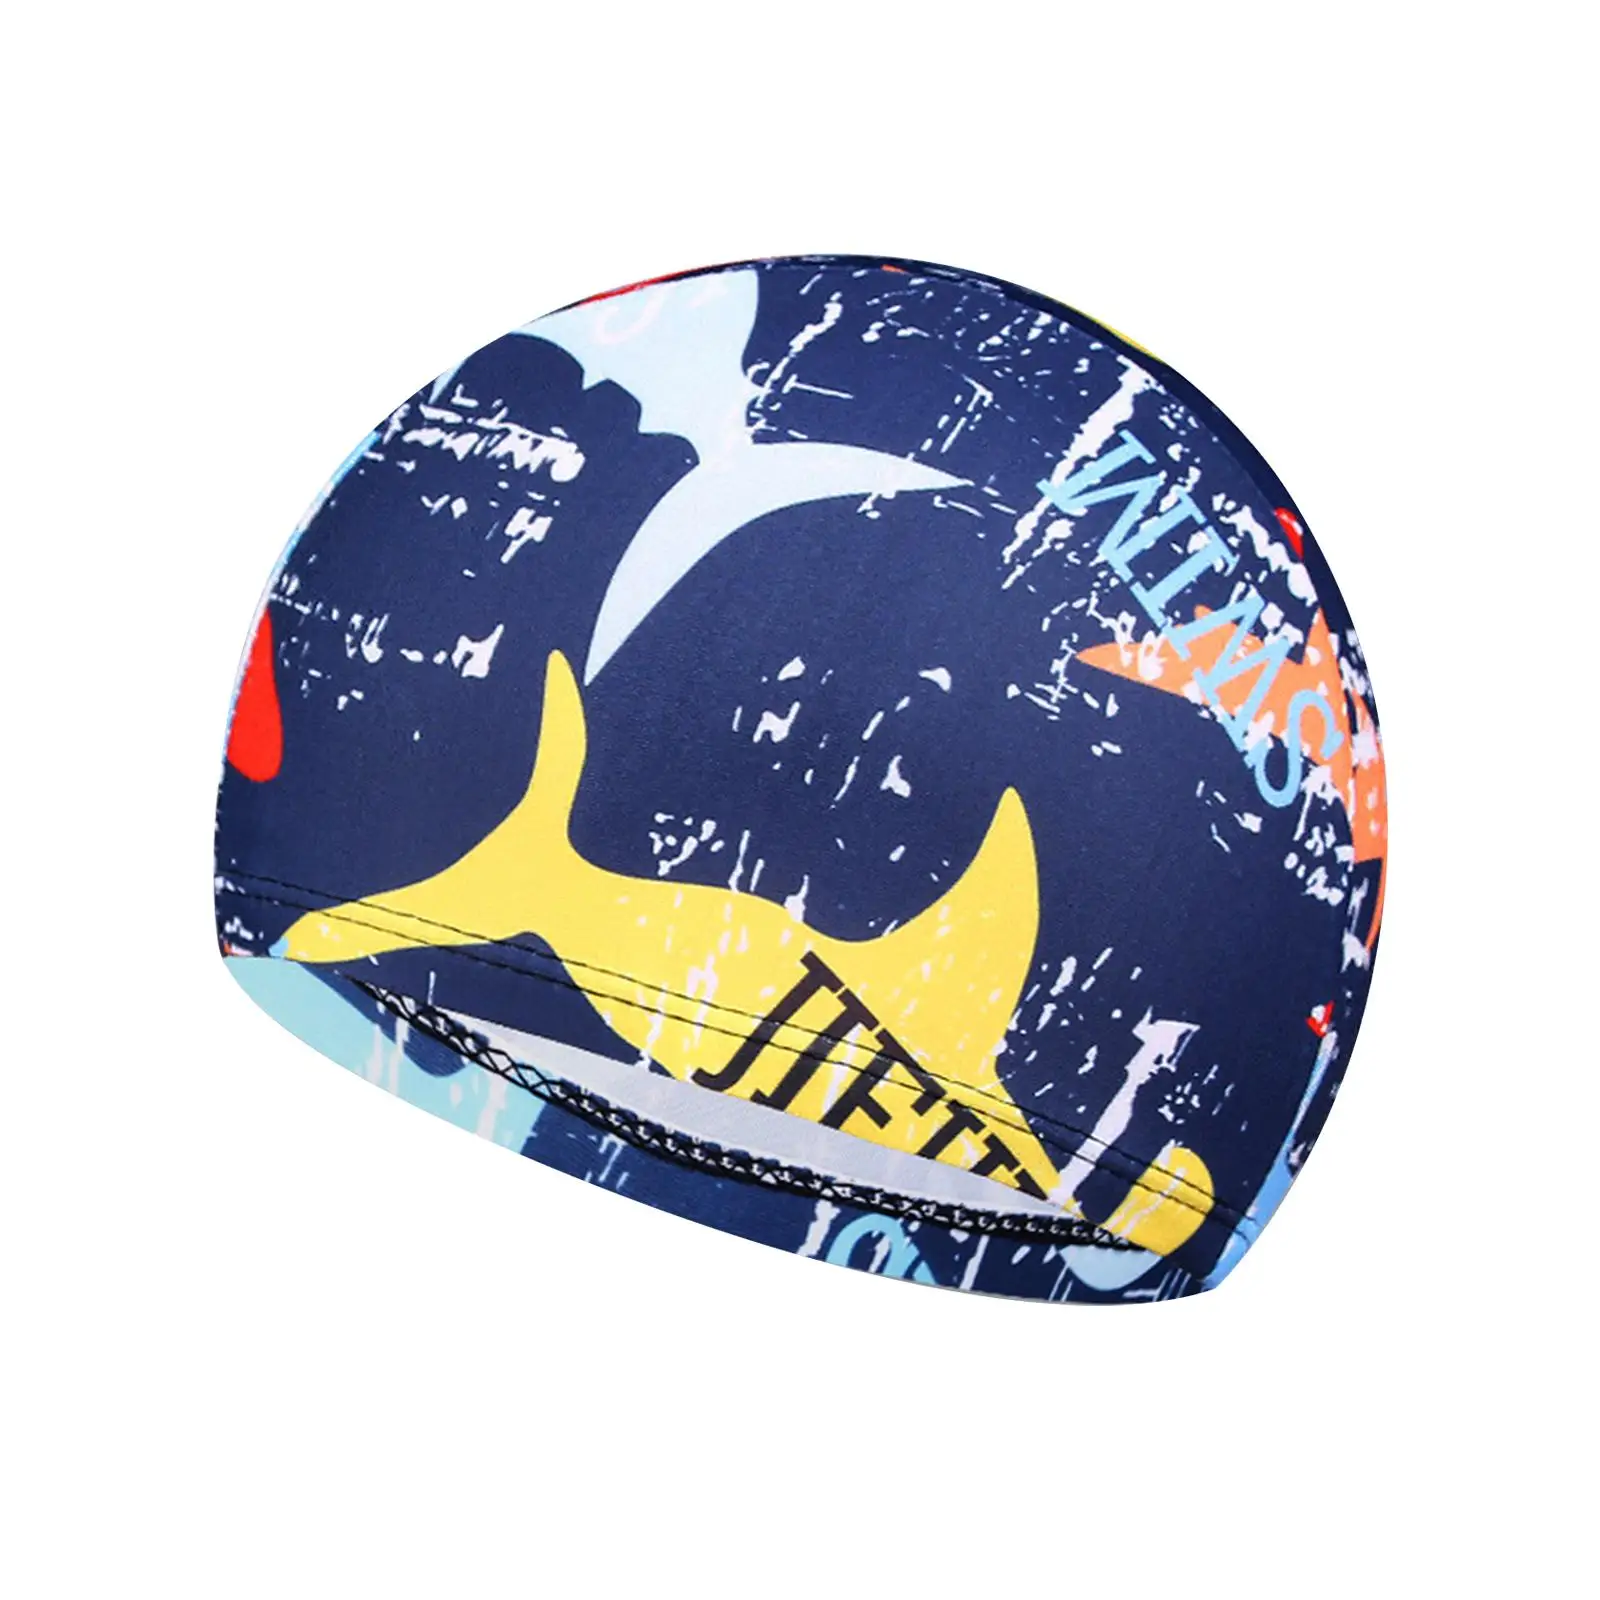 Swimming Cap Summer Elastic with Flowers Printed Swimming Hat for Water Sport Surf Long Hair Summer Beach Men and Women Adults